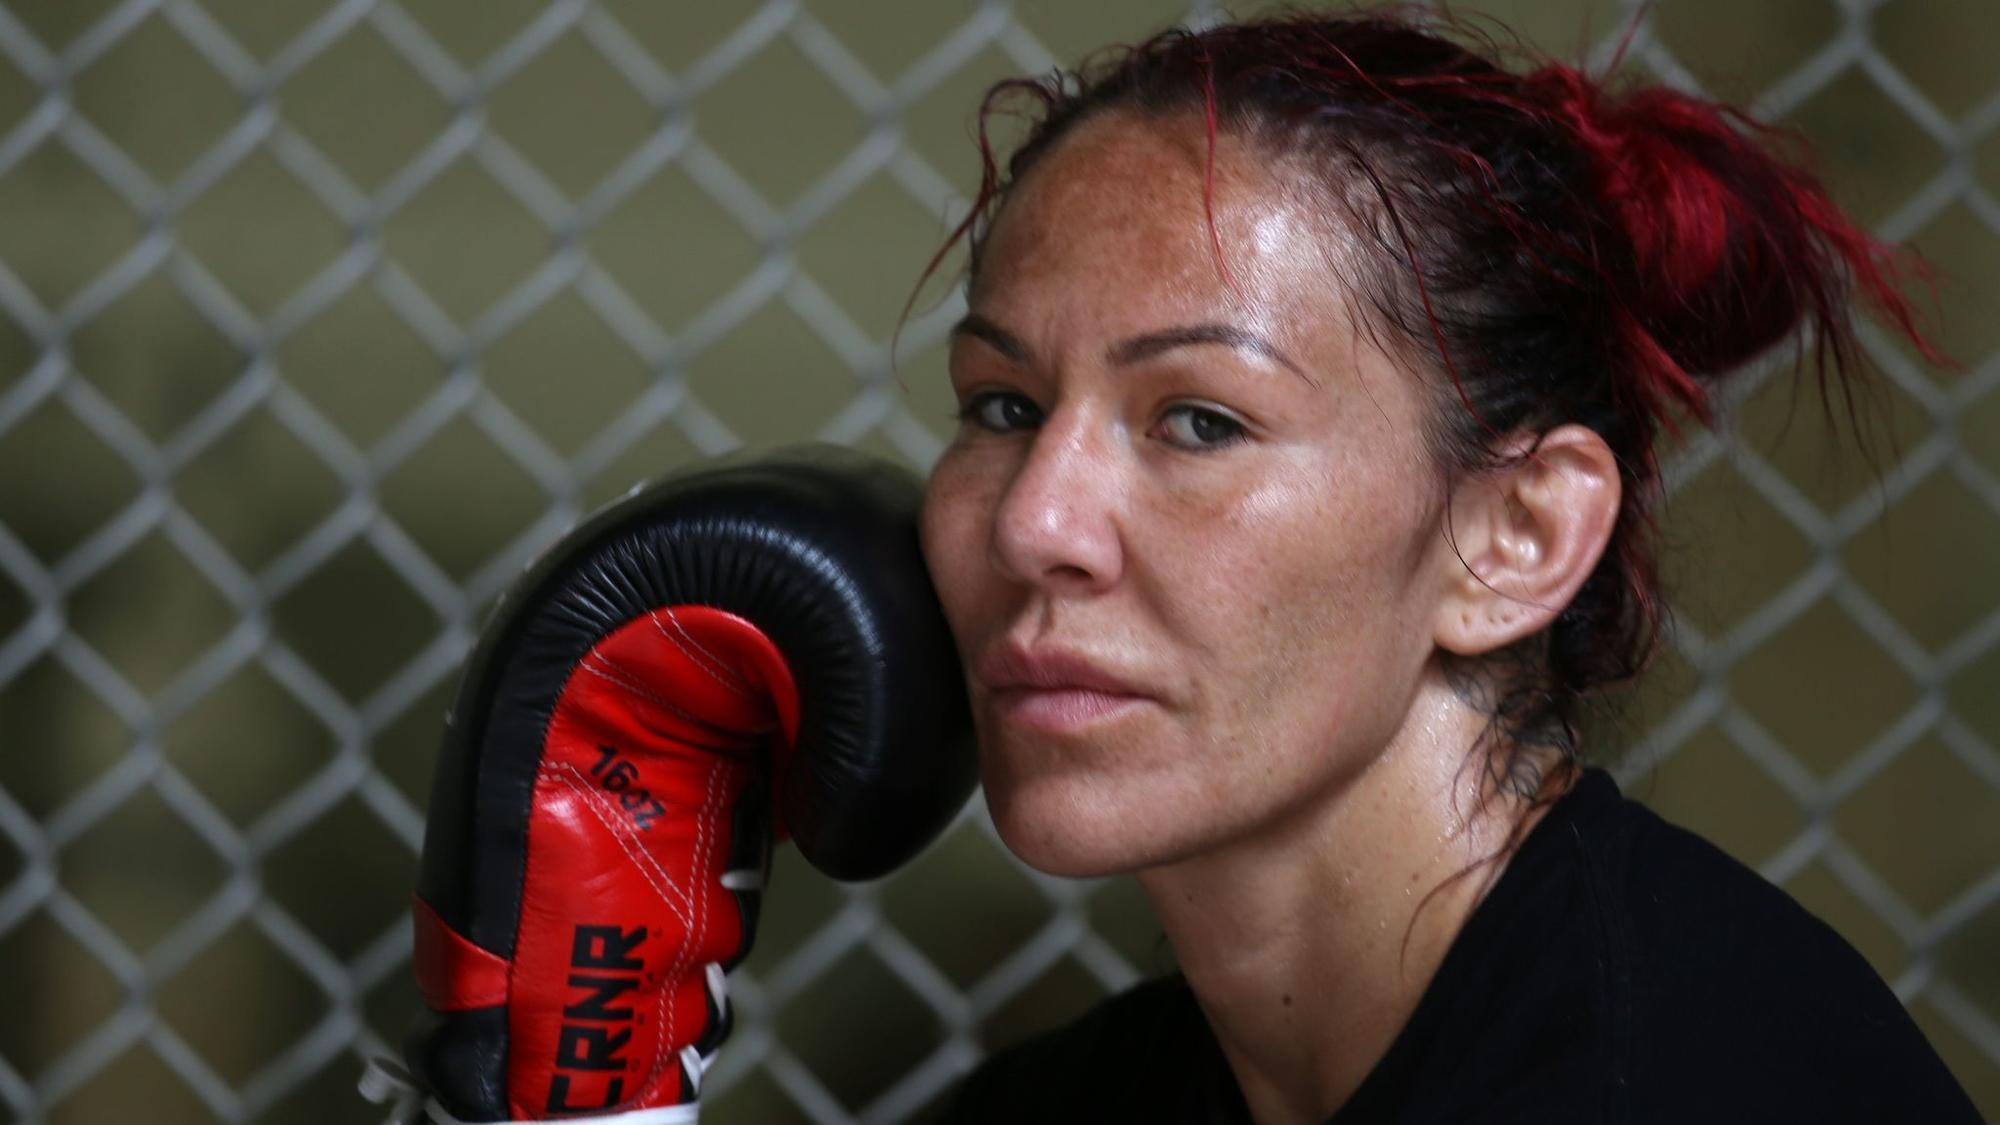 Cris 'Cyborg' Justino feels the time is right for her to dominate in the UFC